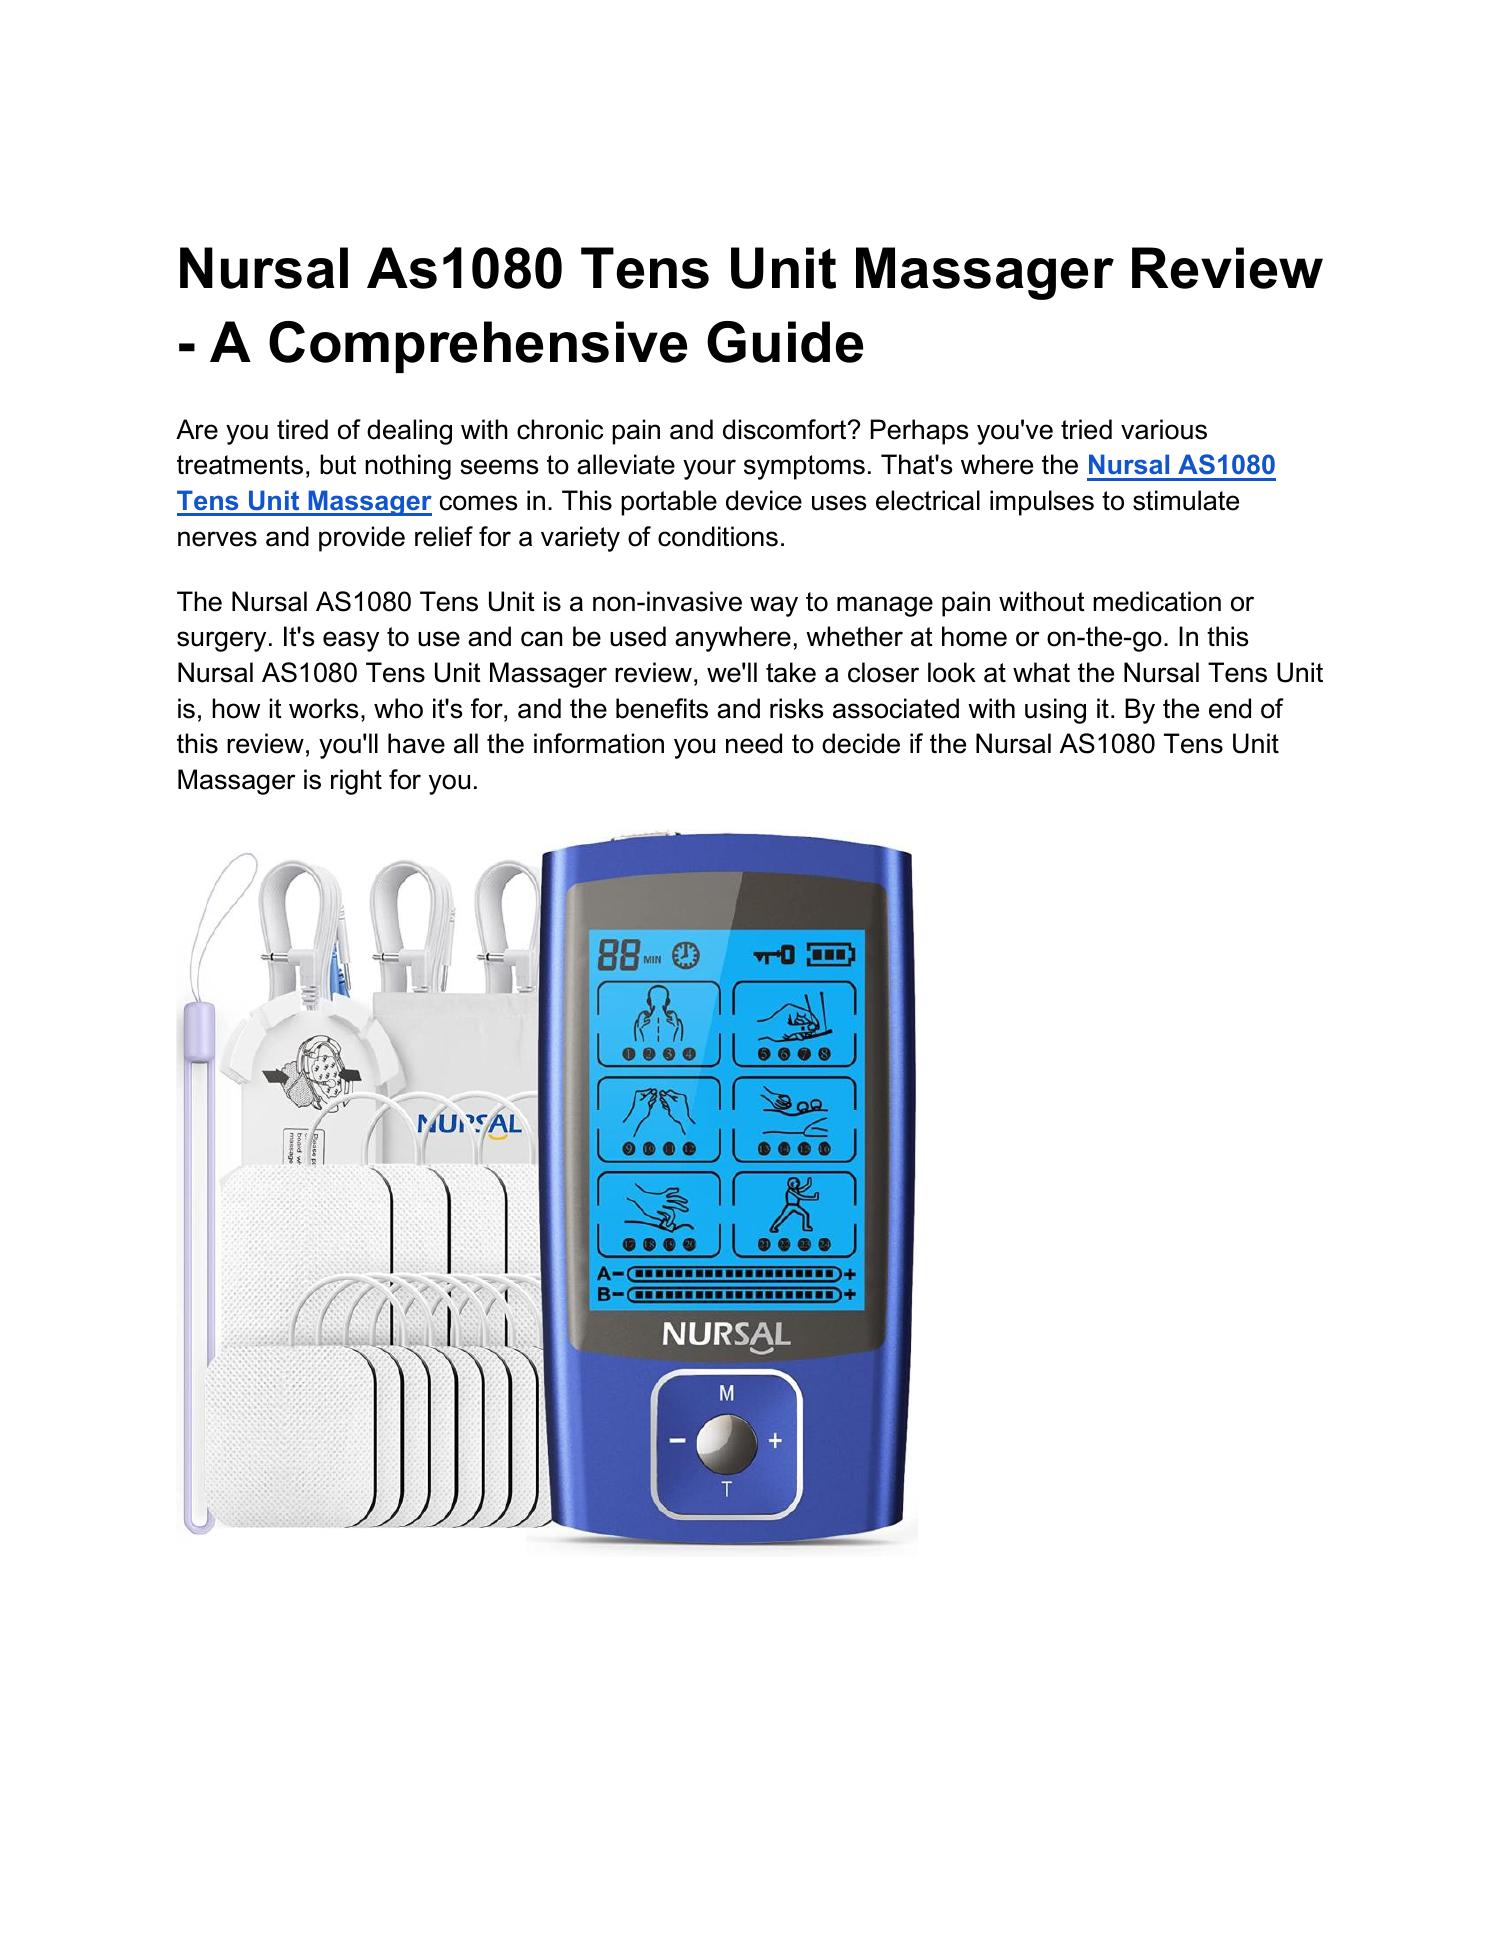 https://www.docdroid.com/file/view/uQVkf4c/nursal-as1080-tens-unit-massager-review-guide-to-pain-relief-and-muscle-stimulation-docx.jpg